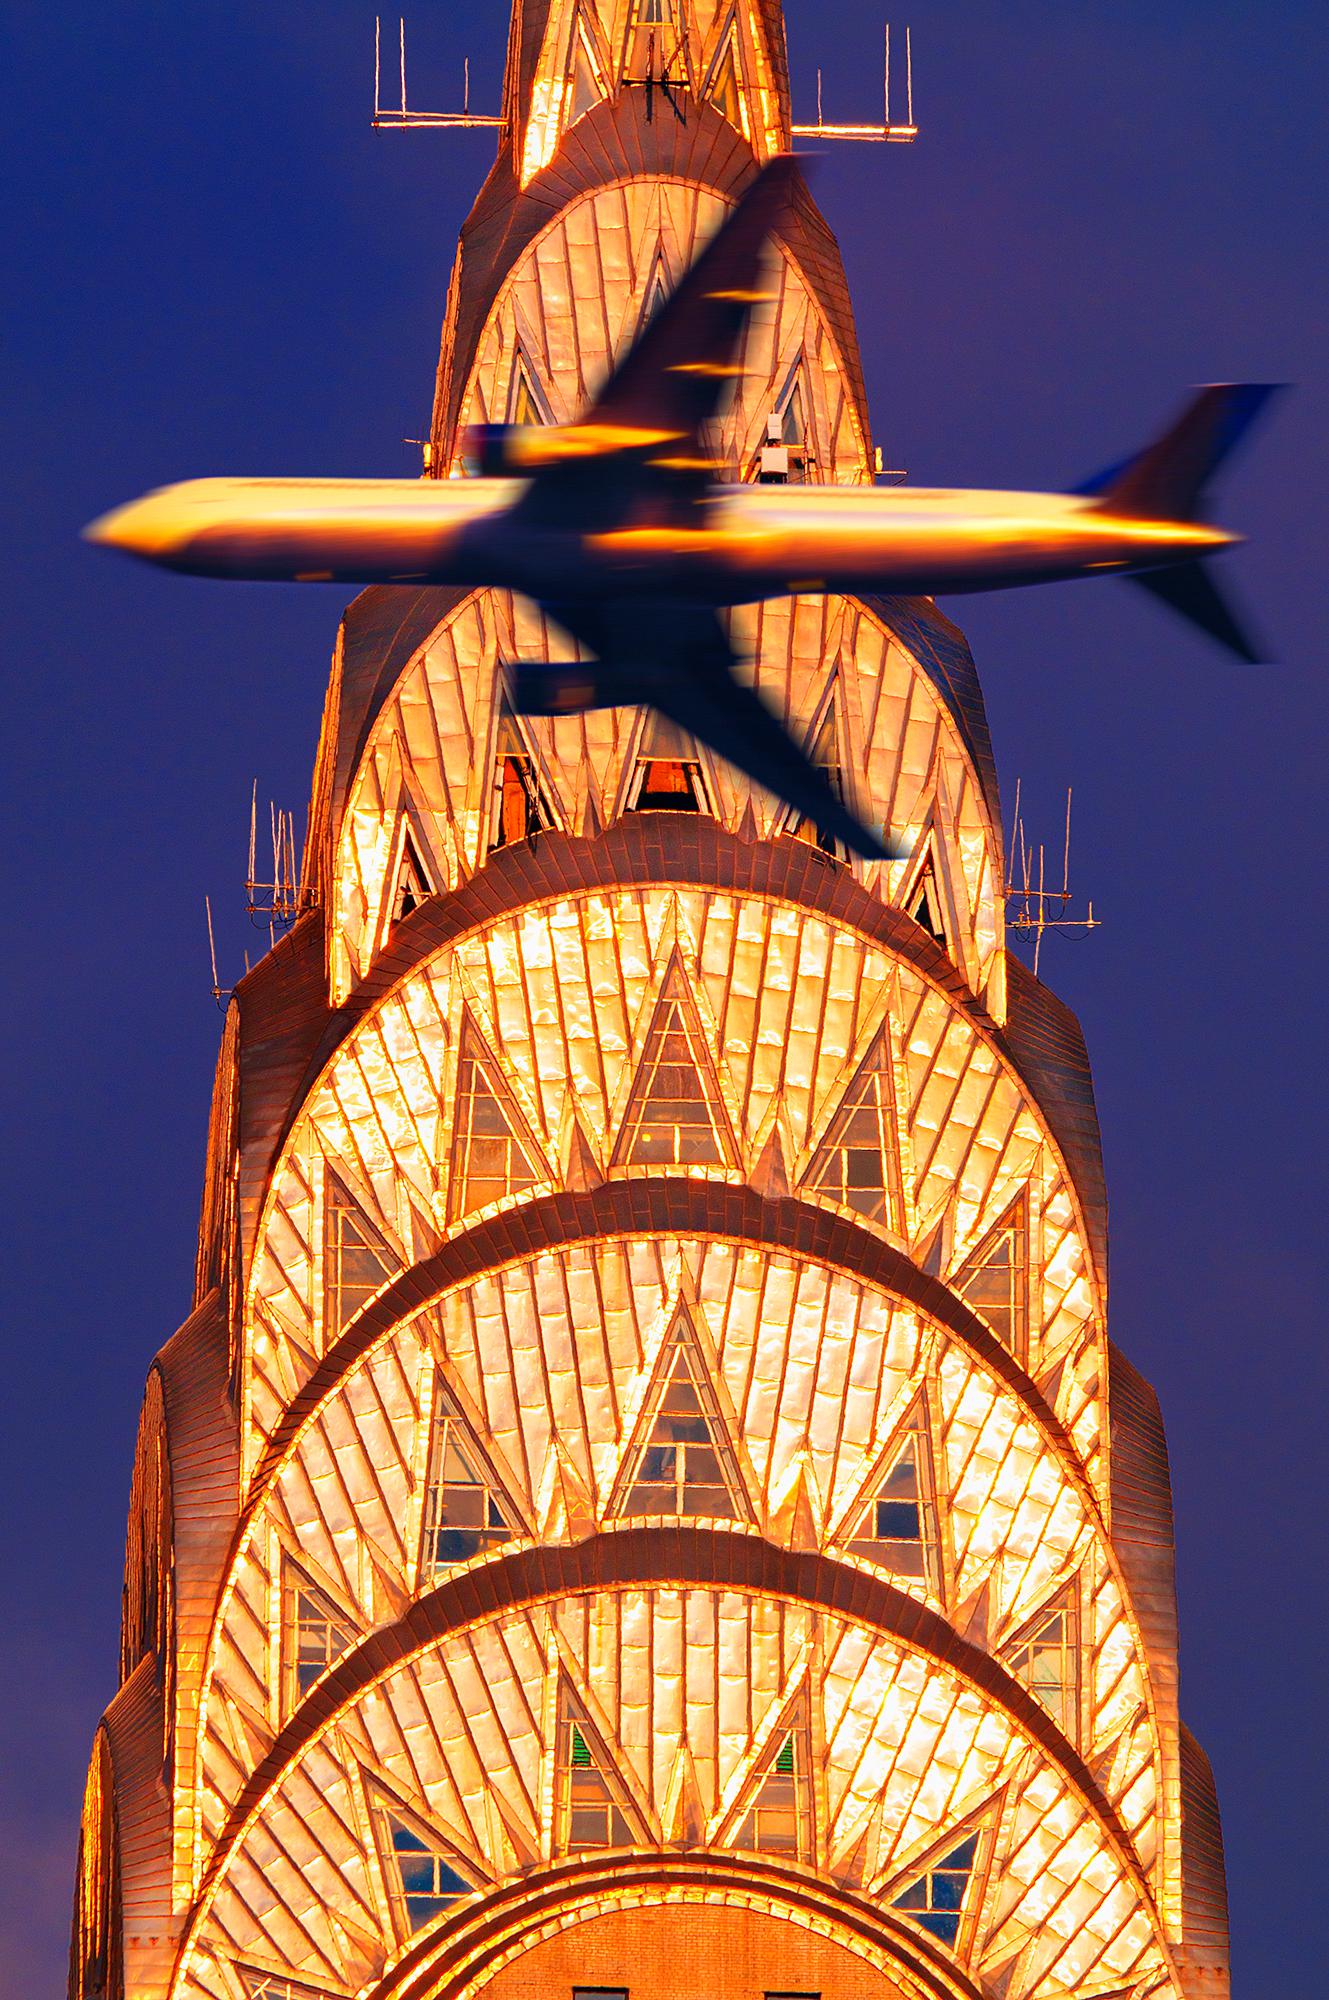 Chrysler Building Spire in Golden Light Intersected with Airplane,  Art Deco